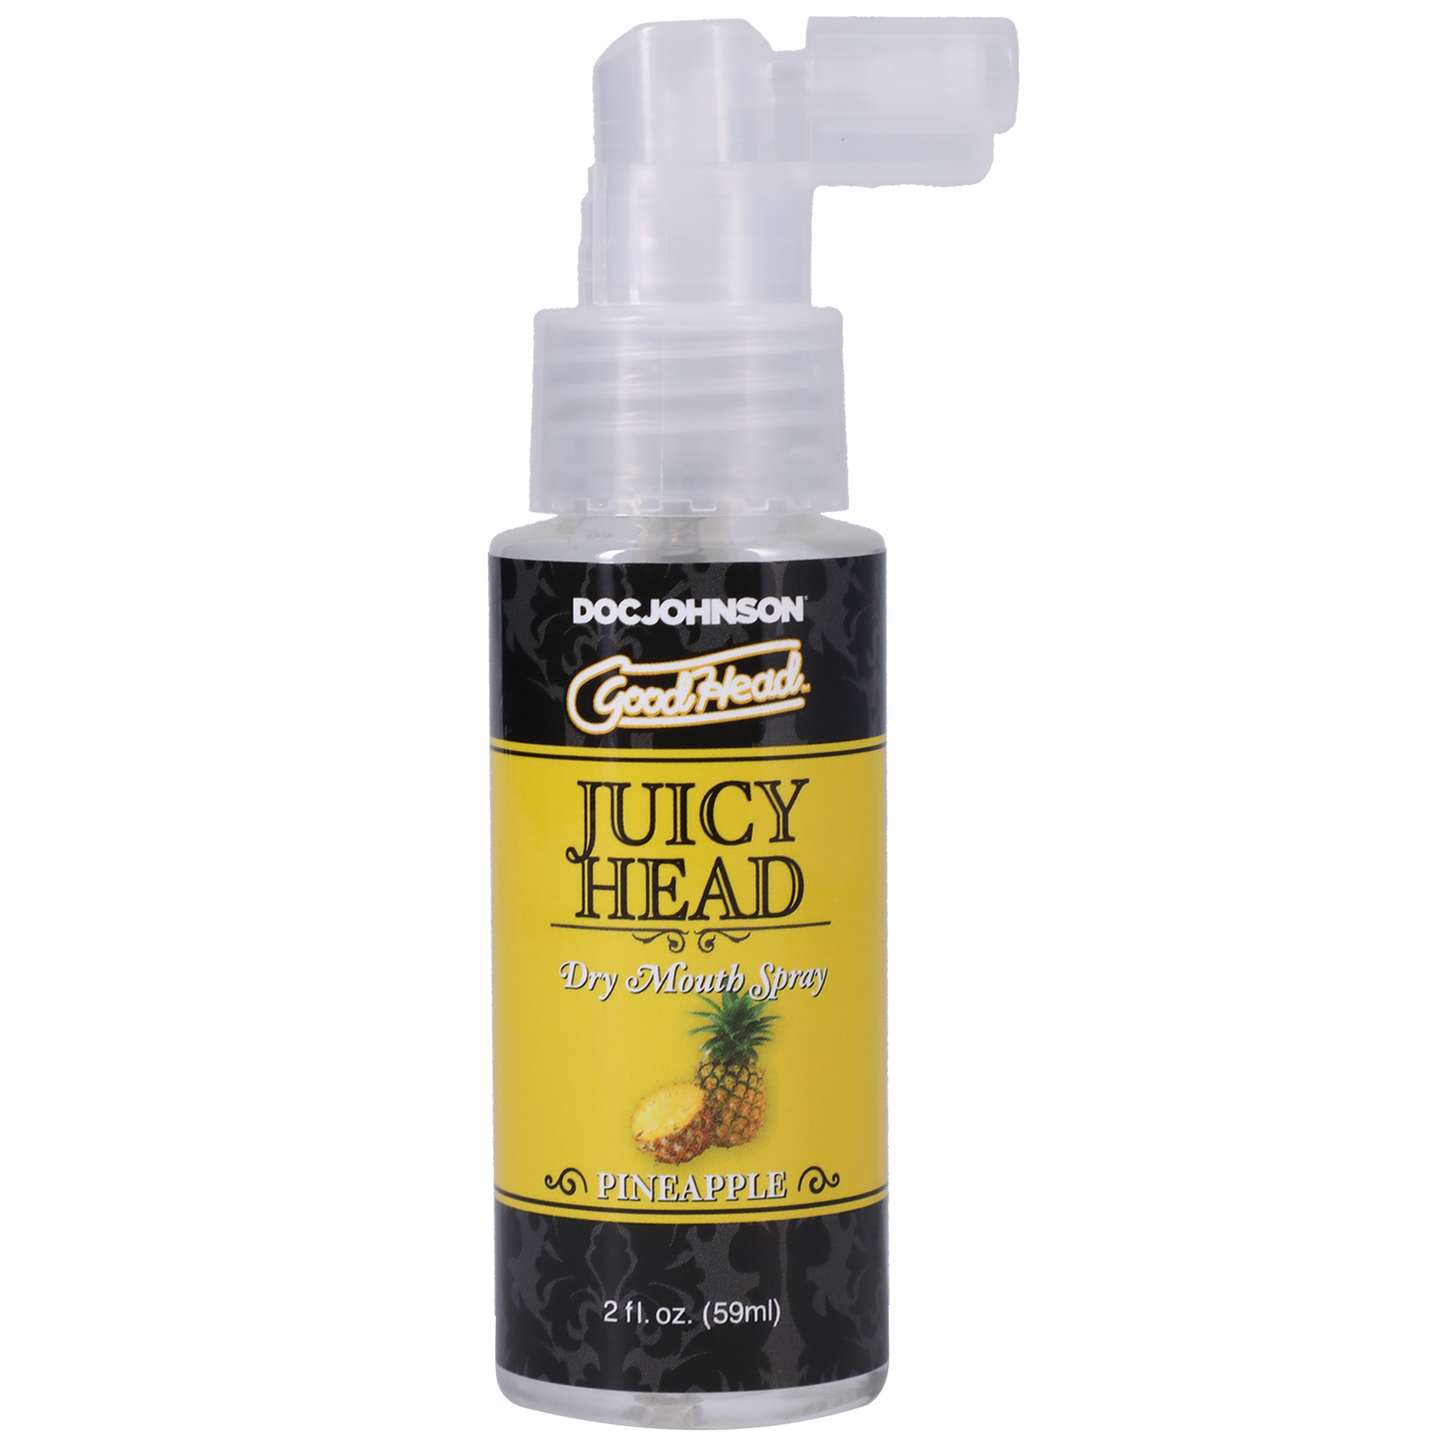 Photo of the bottle of GoodHead Juicy Head from Doc Johson pineapple ) shows its easy to use pump spray nozzle.